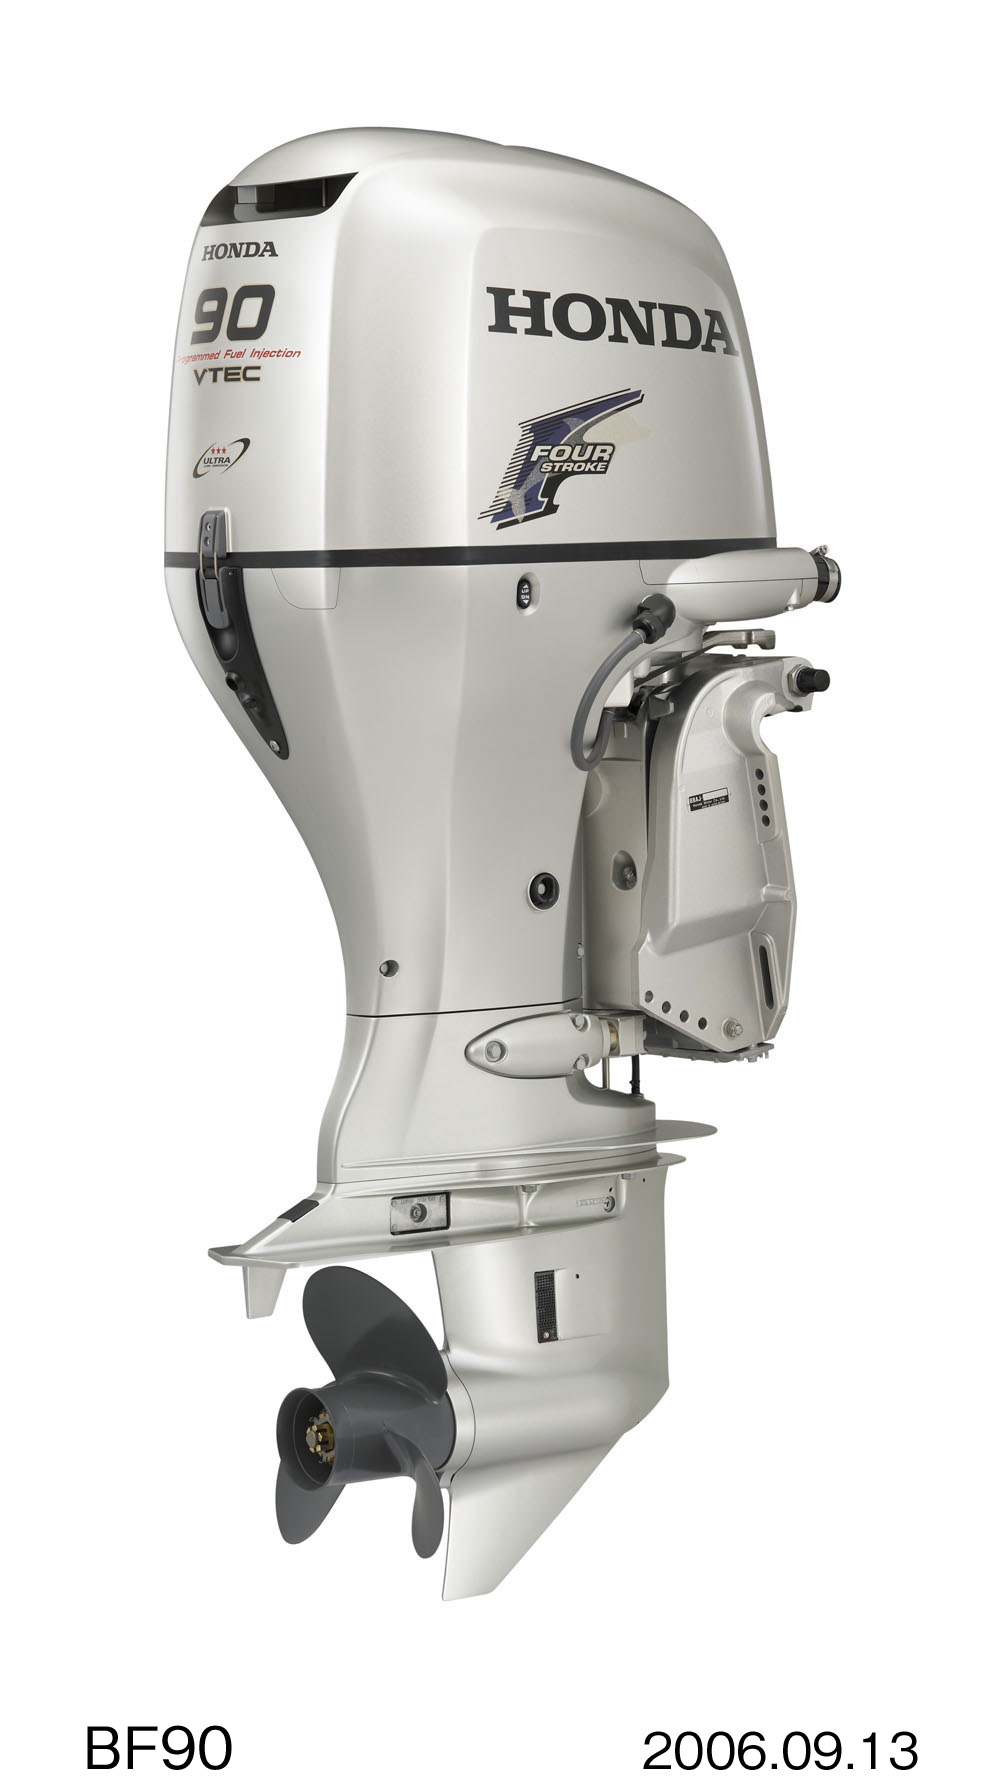 Honda Introduces the All-New BF90 and BF75 4-Stroke Marine Outboard Engines  | Honda Global Corporate Website